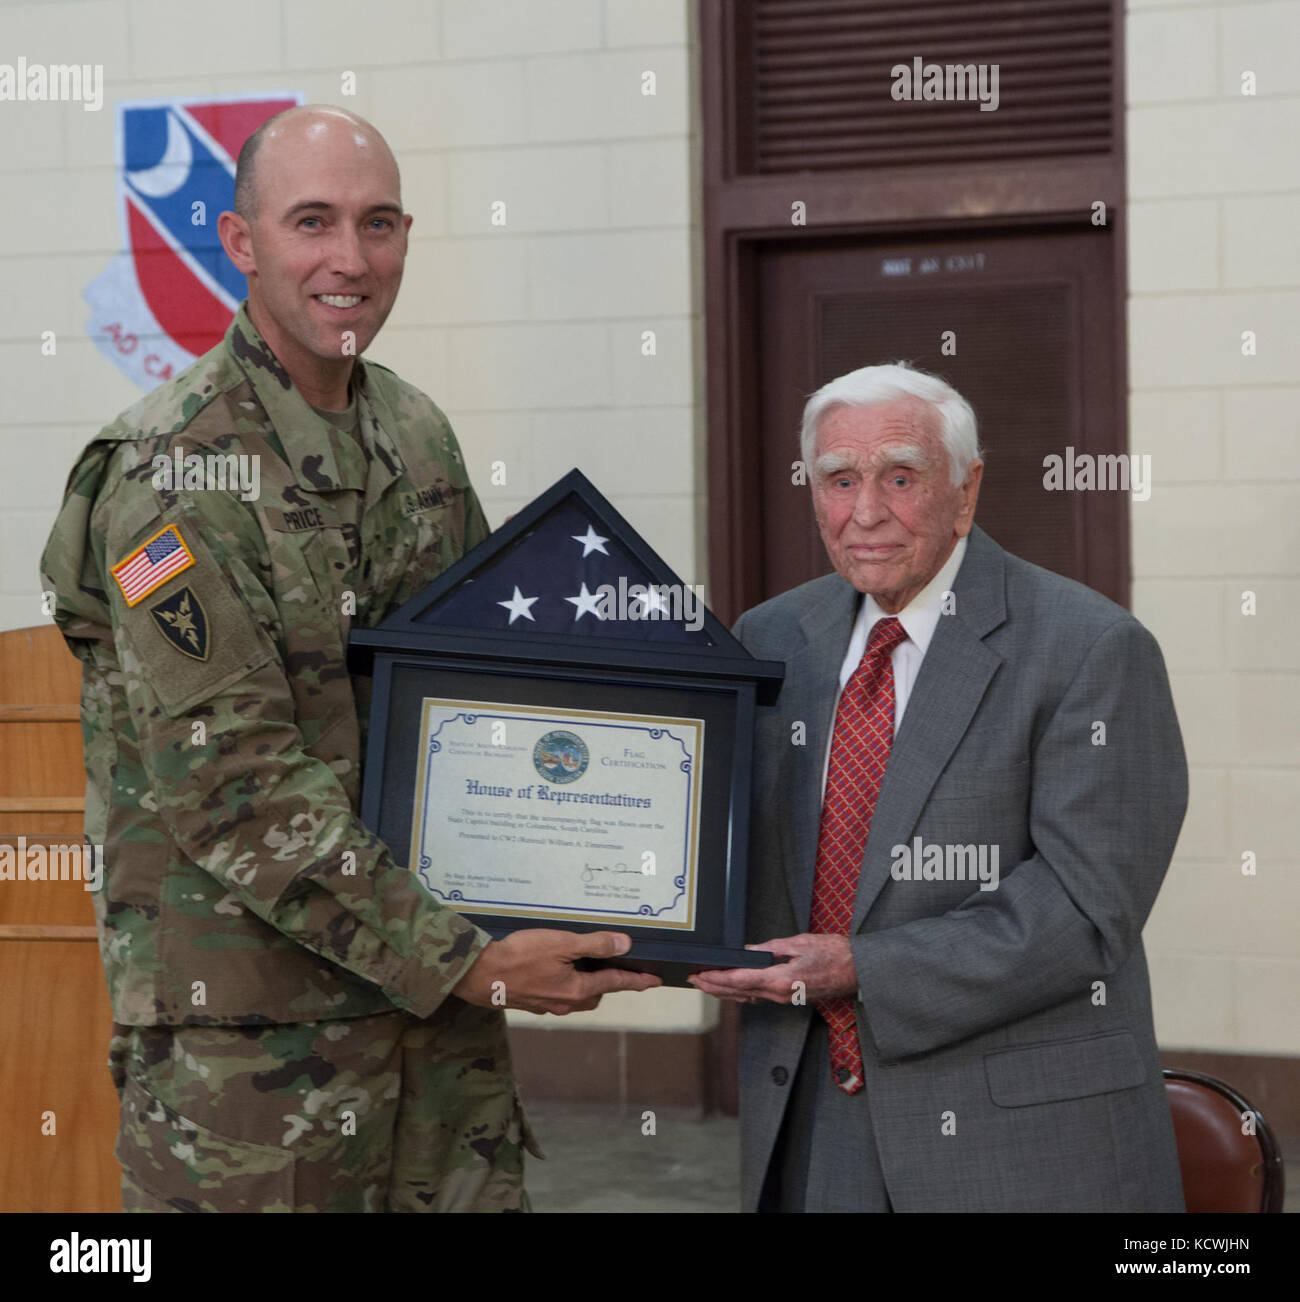 Mr. William Zimmerman receives a U.S. Flag flown over the S.C. state house from U.S. Army Lt. Col. Ryan Price, 228th Theater Tactical Signal Brigade deputy commander, in recognition of his service during a ceremony at the South Carolina Army National Guard Armory in Graniteville, S.C., Nov. 4, 2016. The South Carolina National Guard honored Zimmerman as its oldest living retiree at age 97. Zimmerman served for more than 34 years, which included service during World War II. (U.S. Army National Guard photo by Capt. Brian Hare) Stock Photo